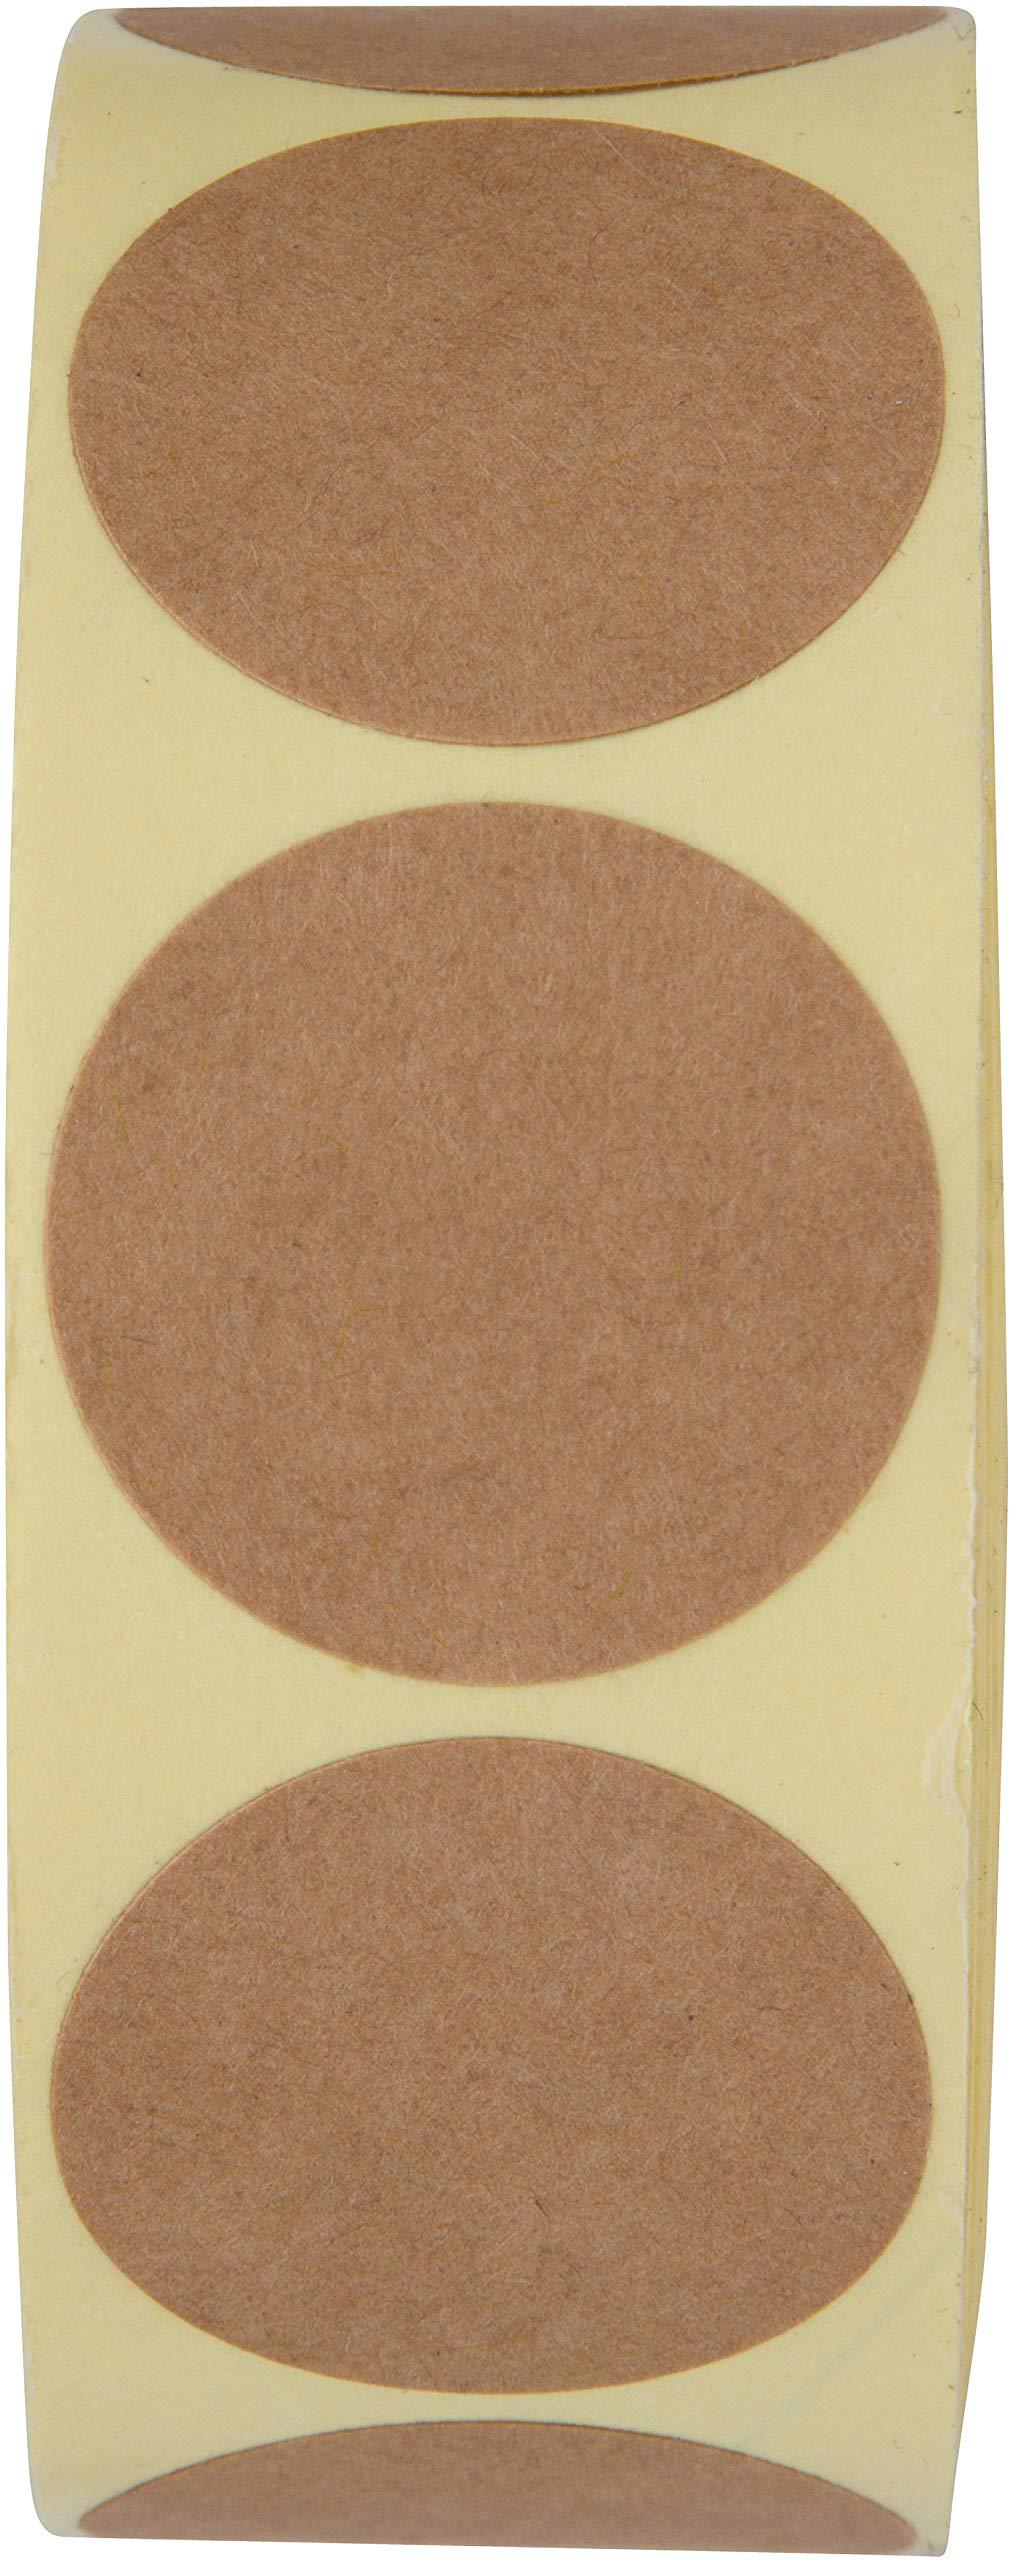 Camp Galaxy 1 Inch Natural Brown Kraft Stickers (1000 Total) - Round Blank Stickers for Store Owners, Crafts, Organizing, Jar and Canning Labels, Price Tags, Clearance Sales - LeoForward Australia